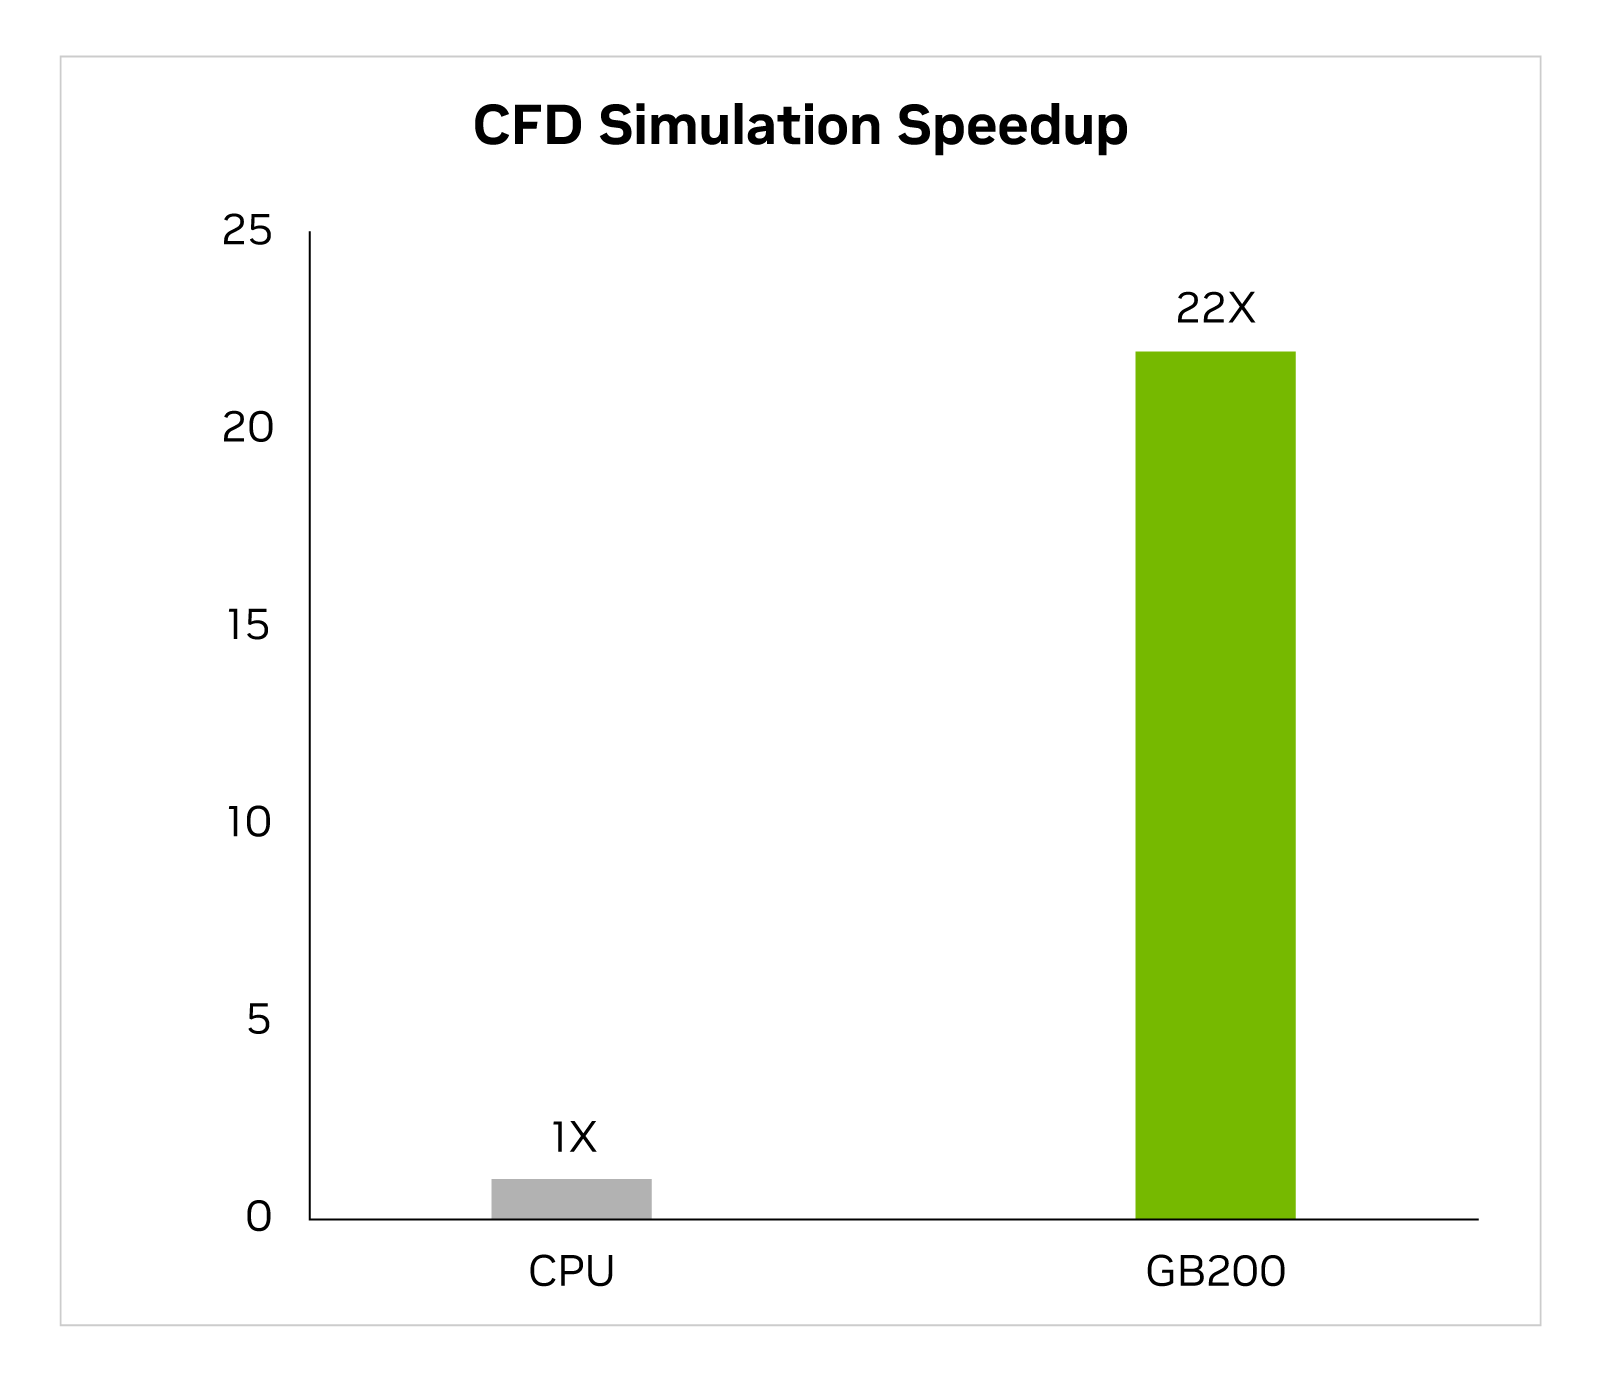 A bar chart, showing CPU with a value of 1x and GB200 with a value of 22x.
